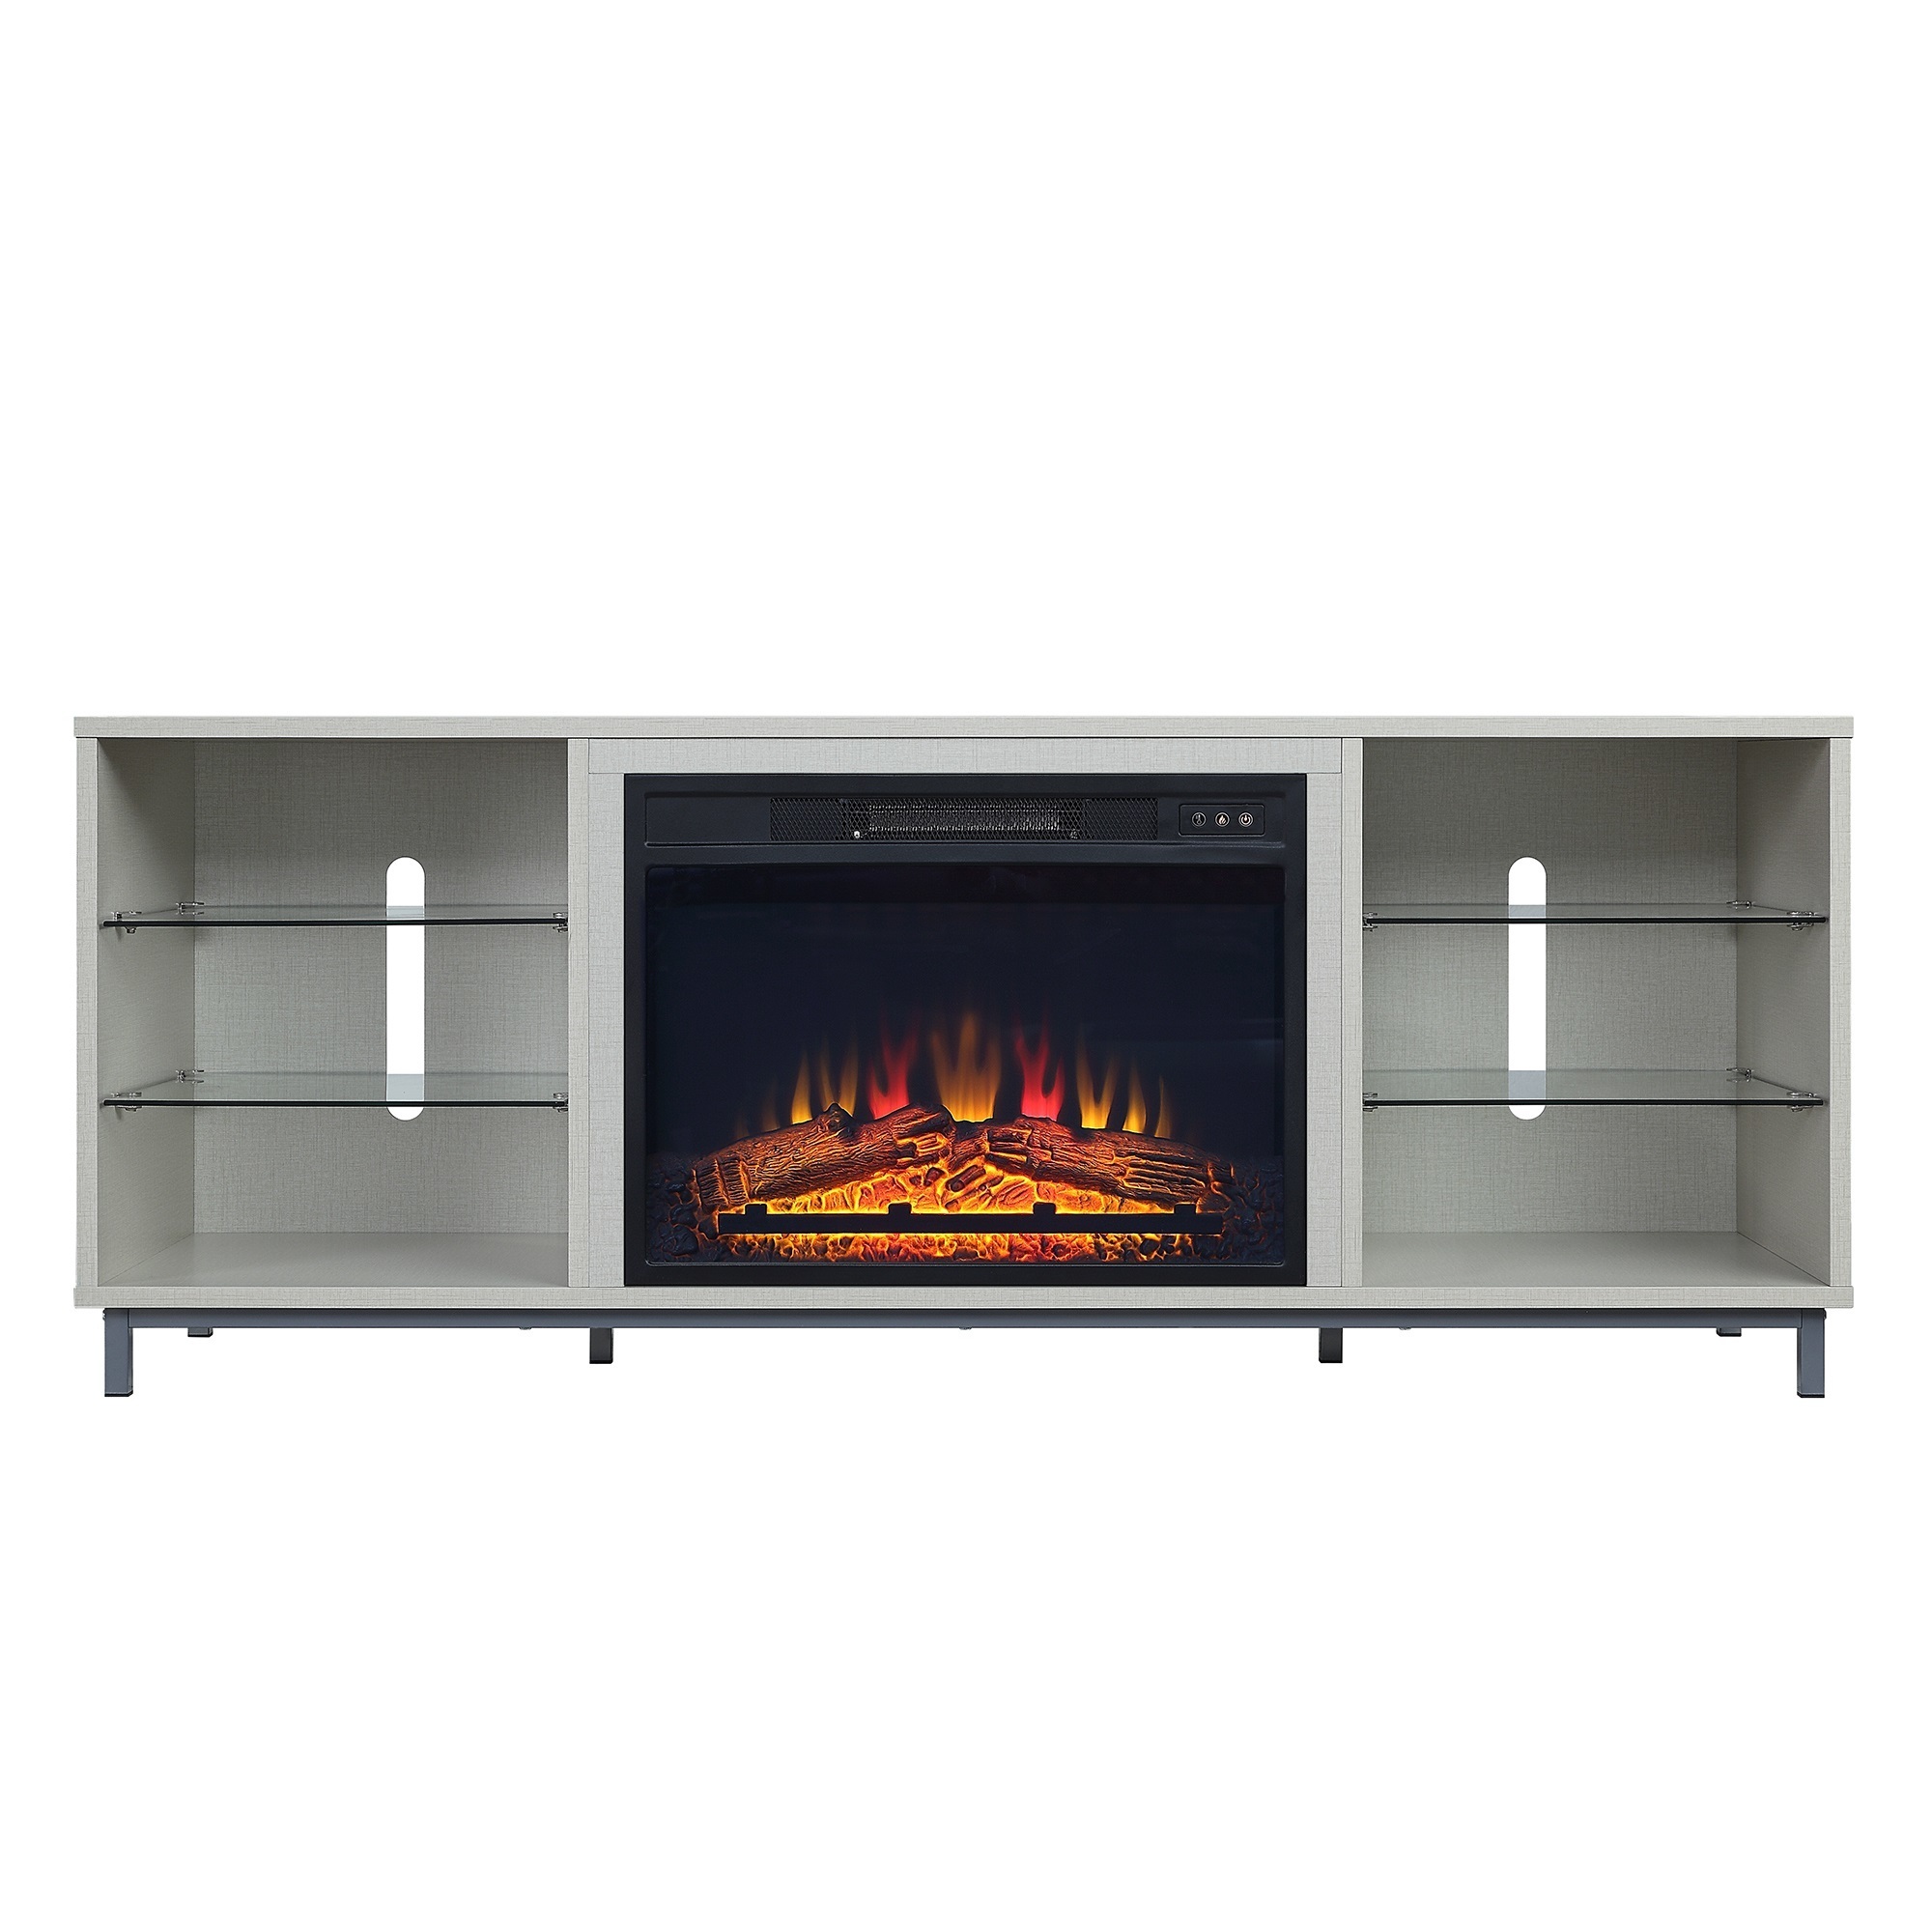 Manhattan Comfort, Brighton 60Inch Fireplace with Glass Shelves in Beige, Width 60 in, Height 24 in, Depth 16 in, Model FP4